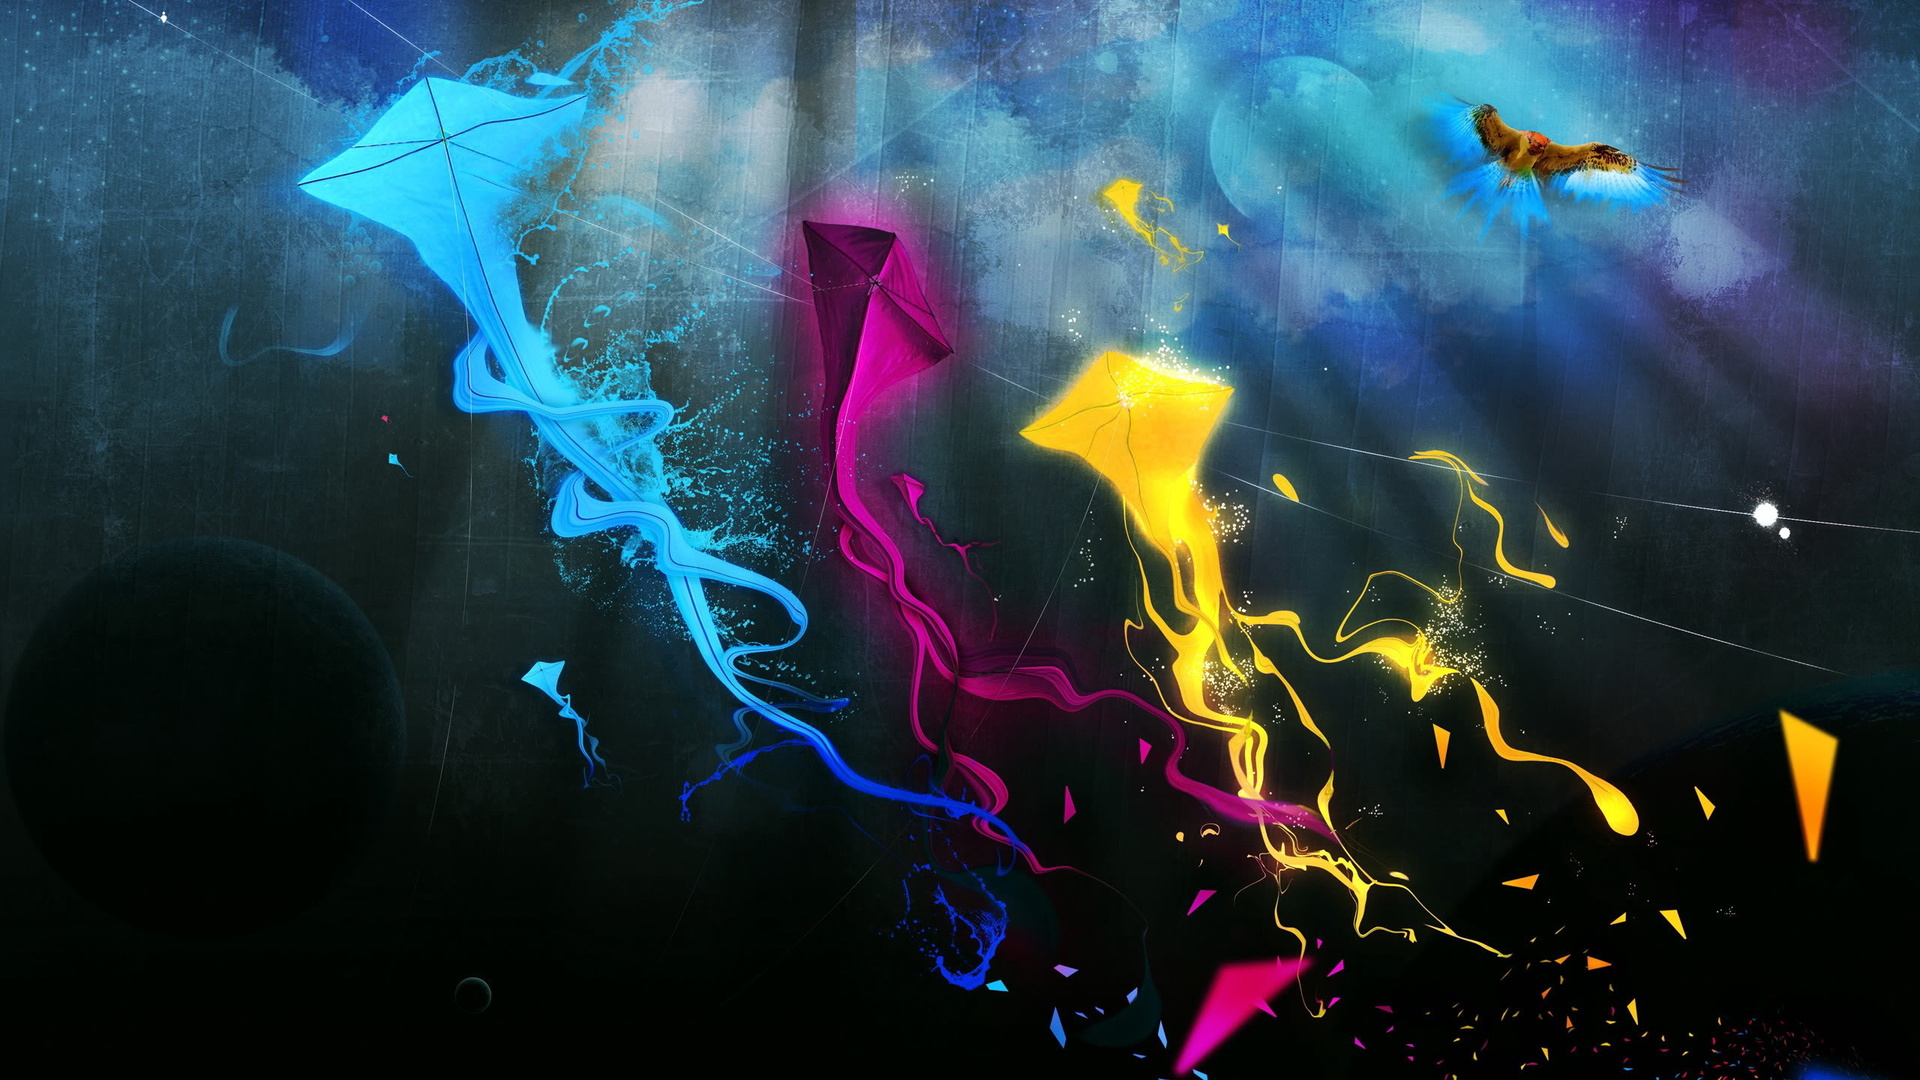 Abstract Paint Images Wallpaper Full HD Wallpaper